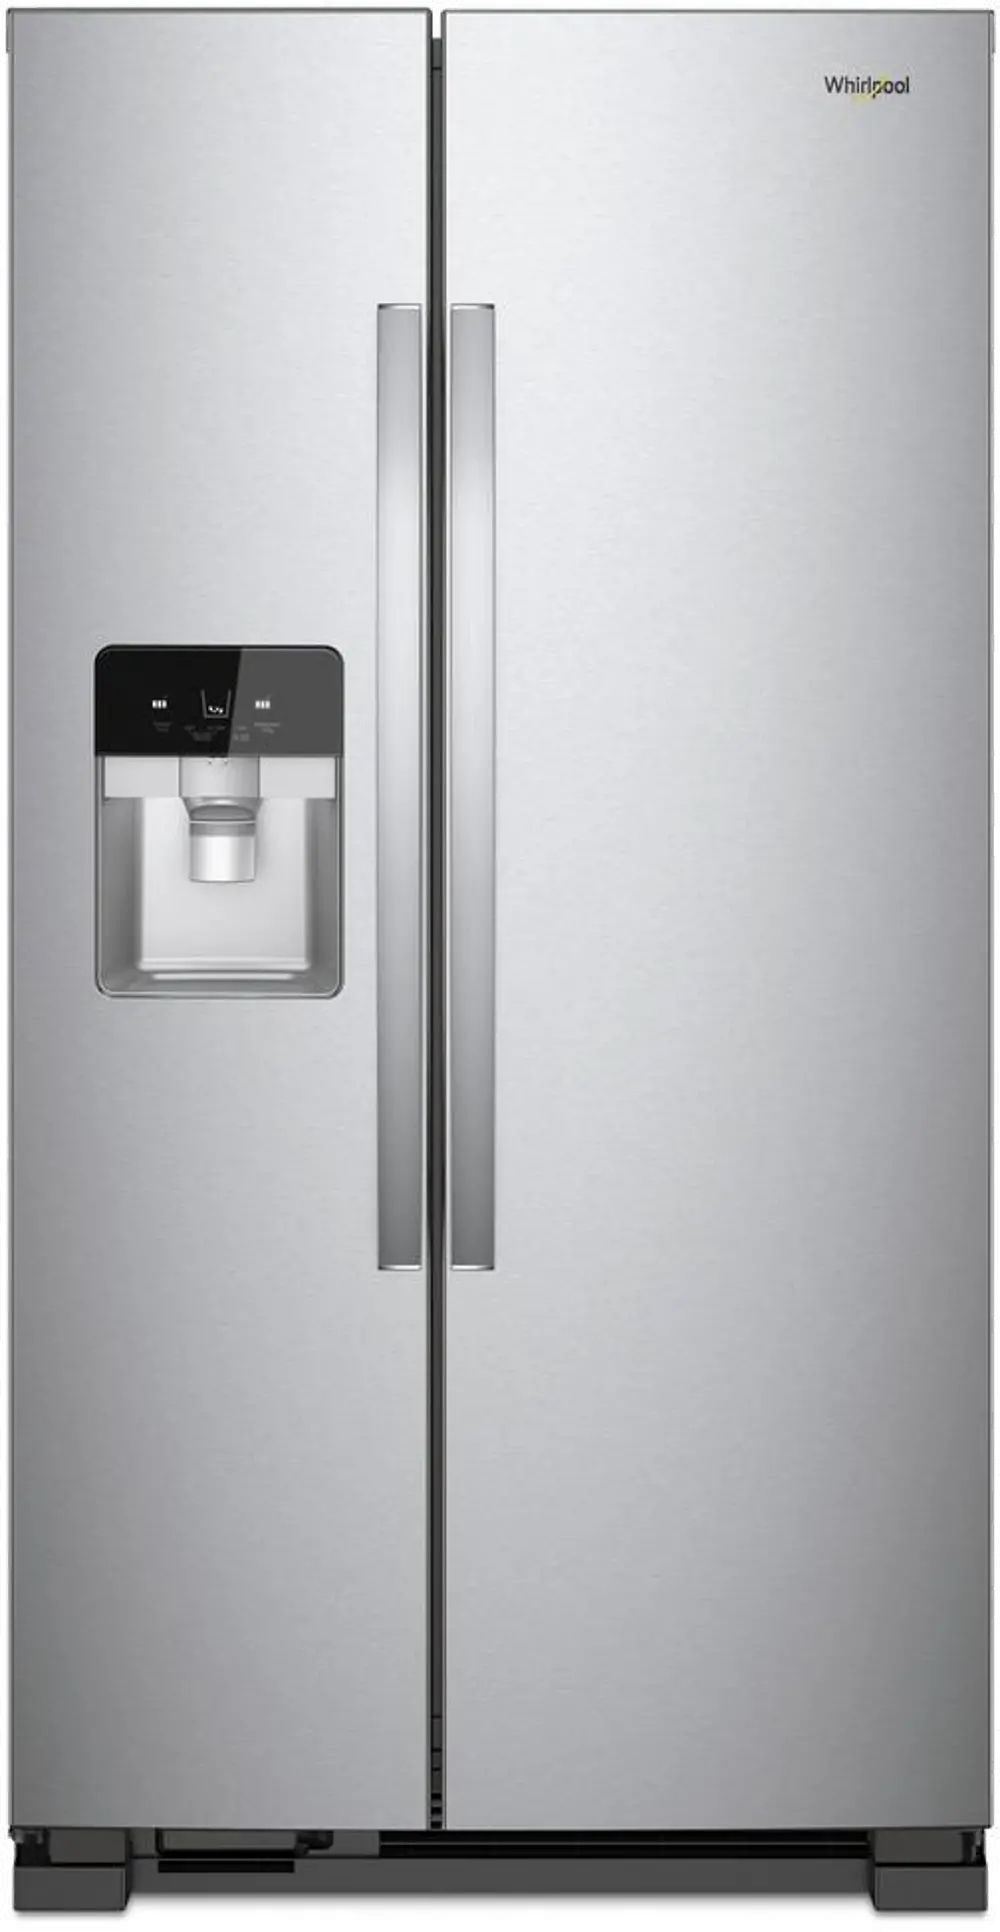 WRS321SDHZ Whirlpool 21.4 cu ft Side by Side Refrigerator - 33 W Stainless Steel-1